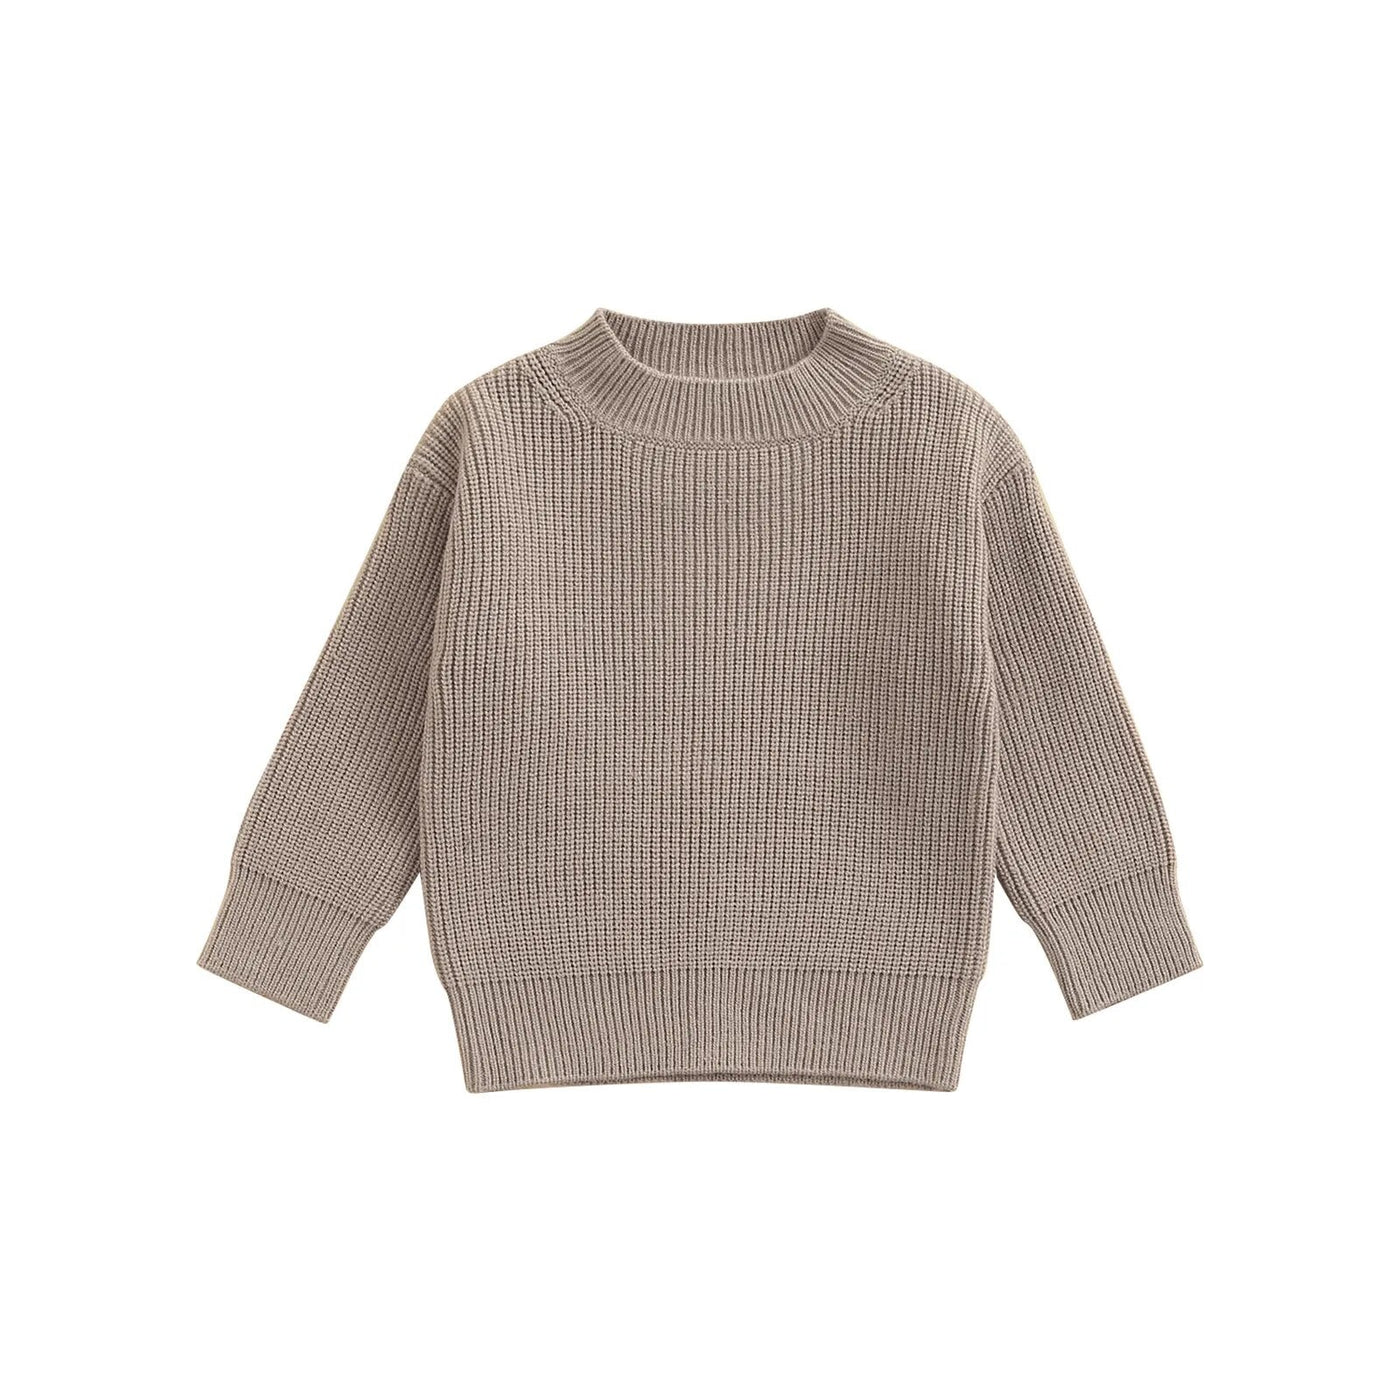 Thick Knitted Long Sleeve Sweaters Baby Kid 0-6 Years - Skaldo & Malin